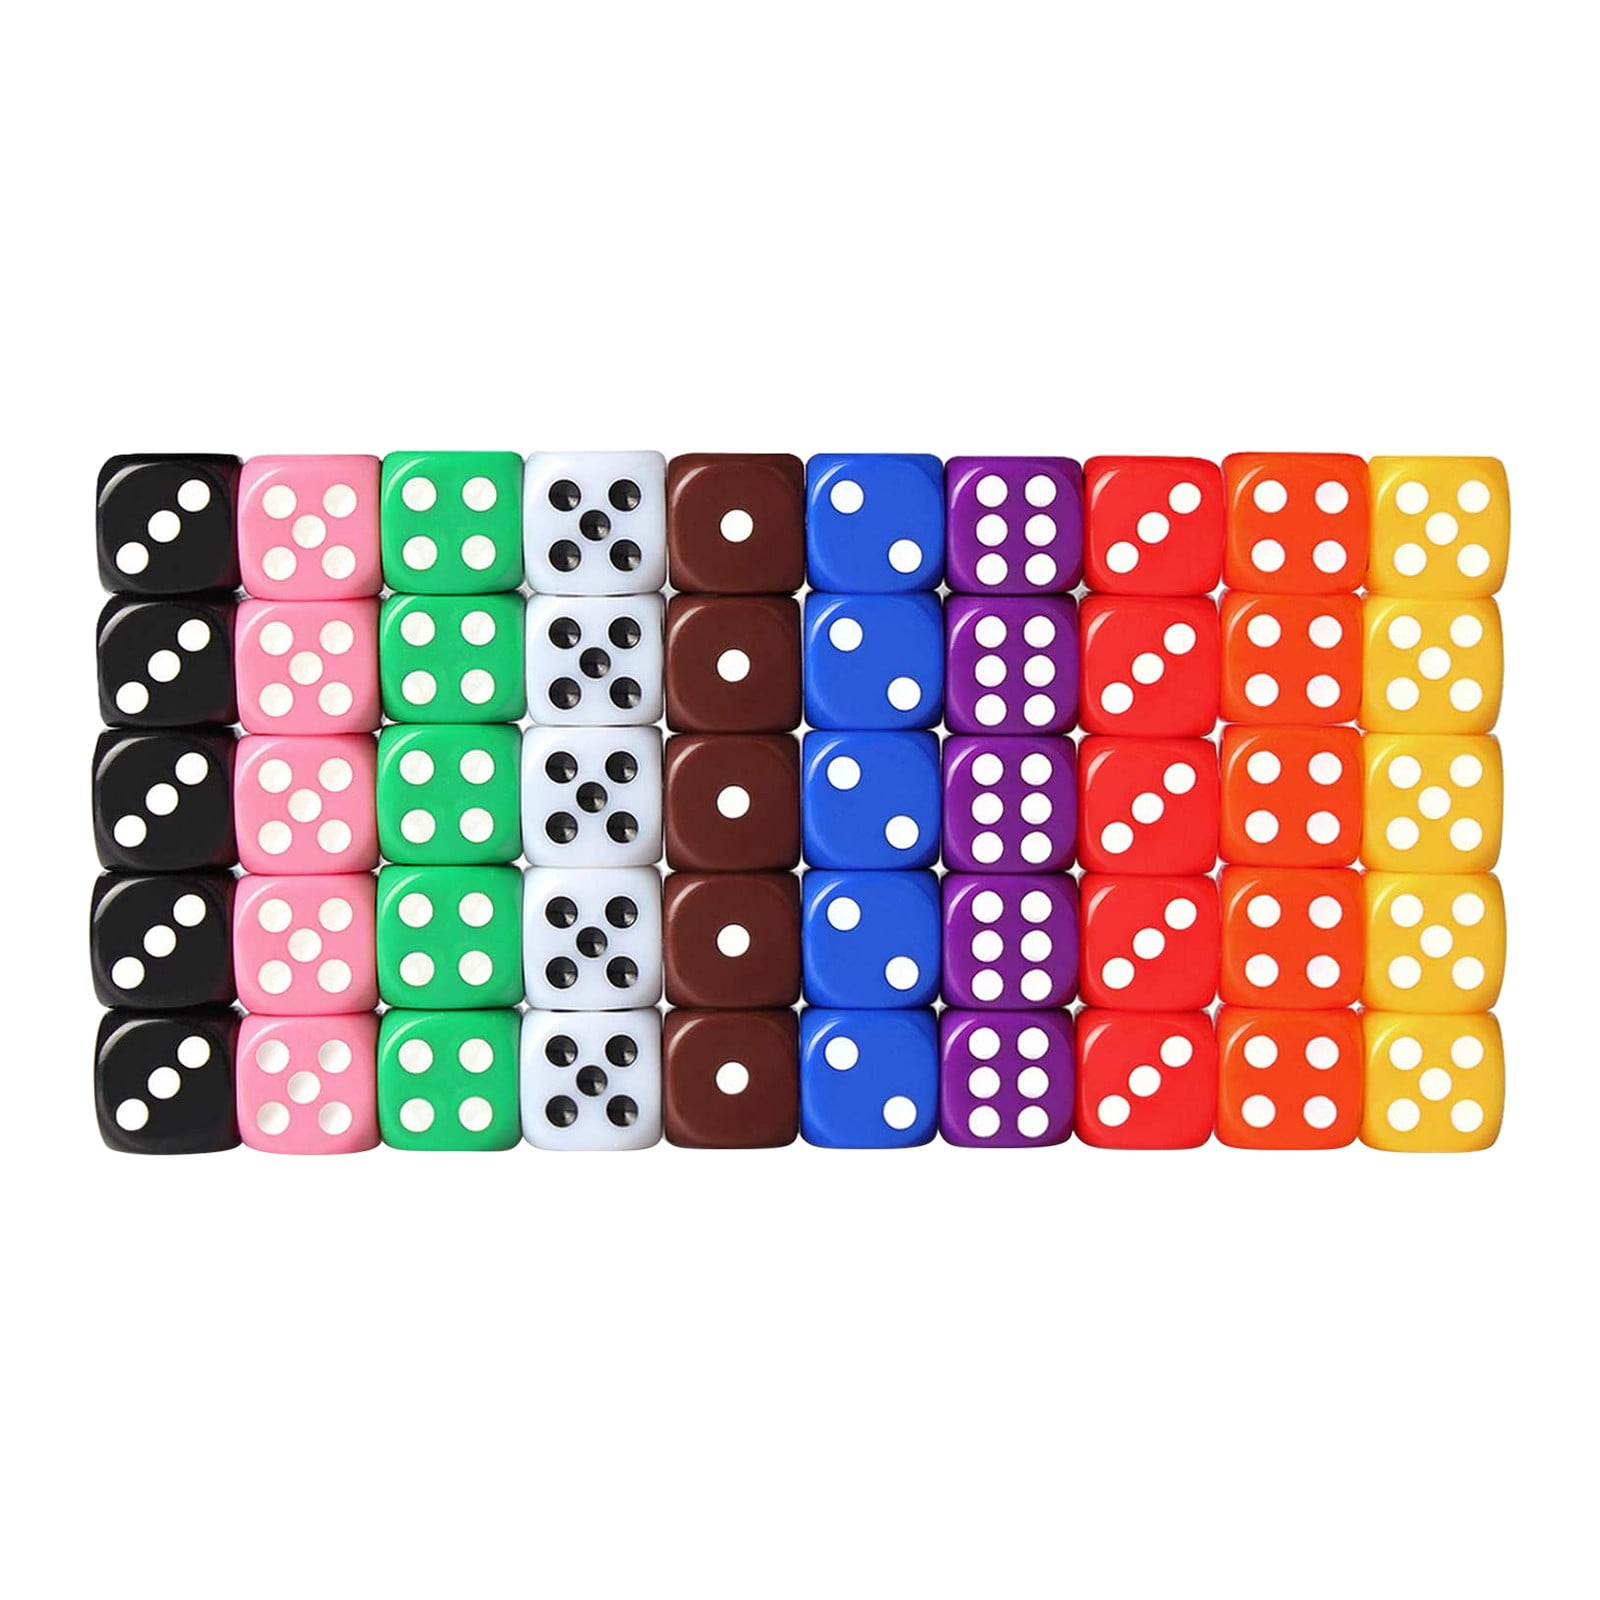 Details about   100Pcs 5mm Dice Set Colored Dice 6 Sided Dice Dice 